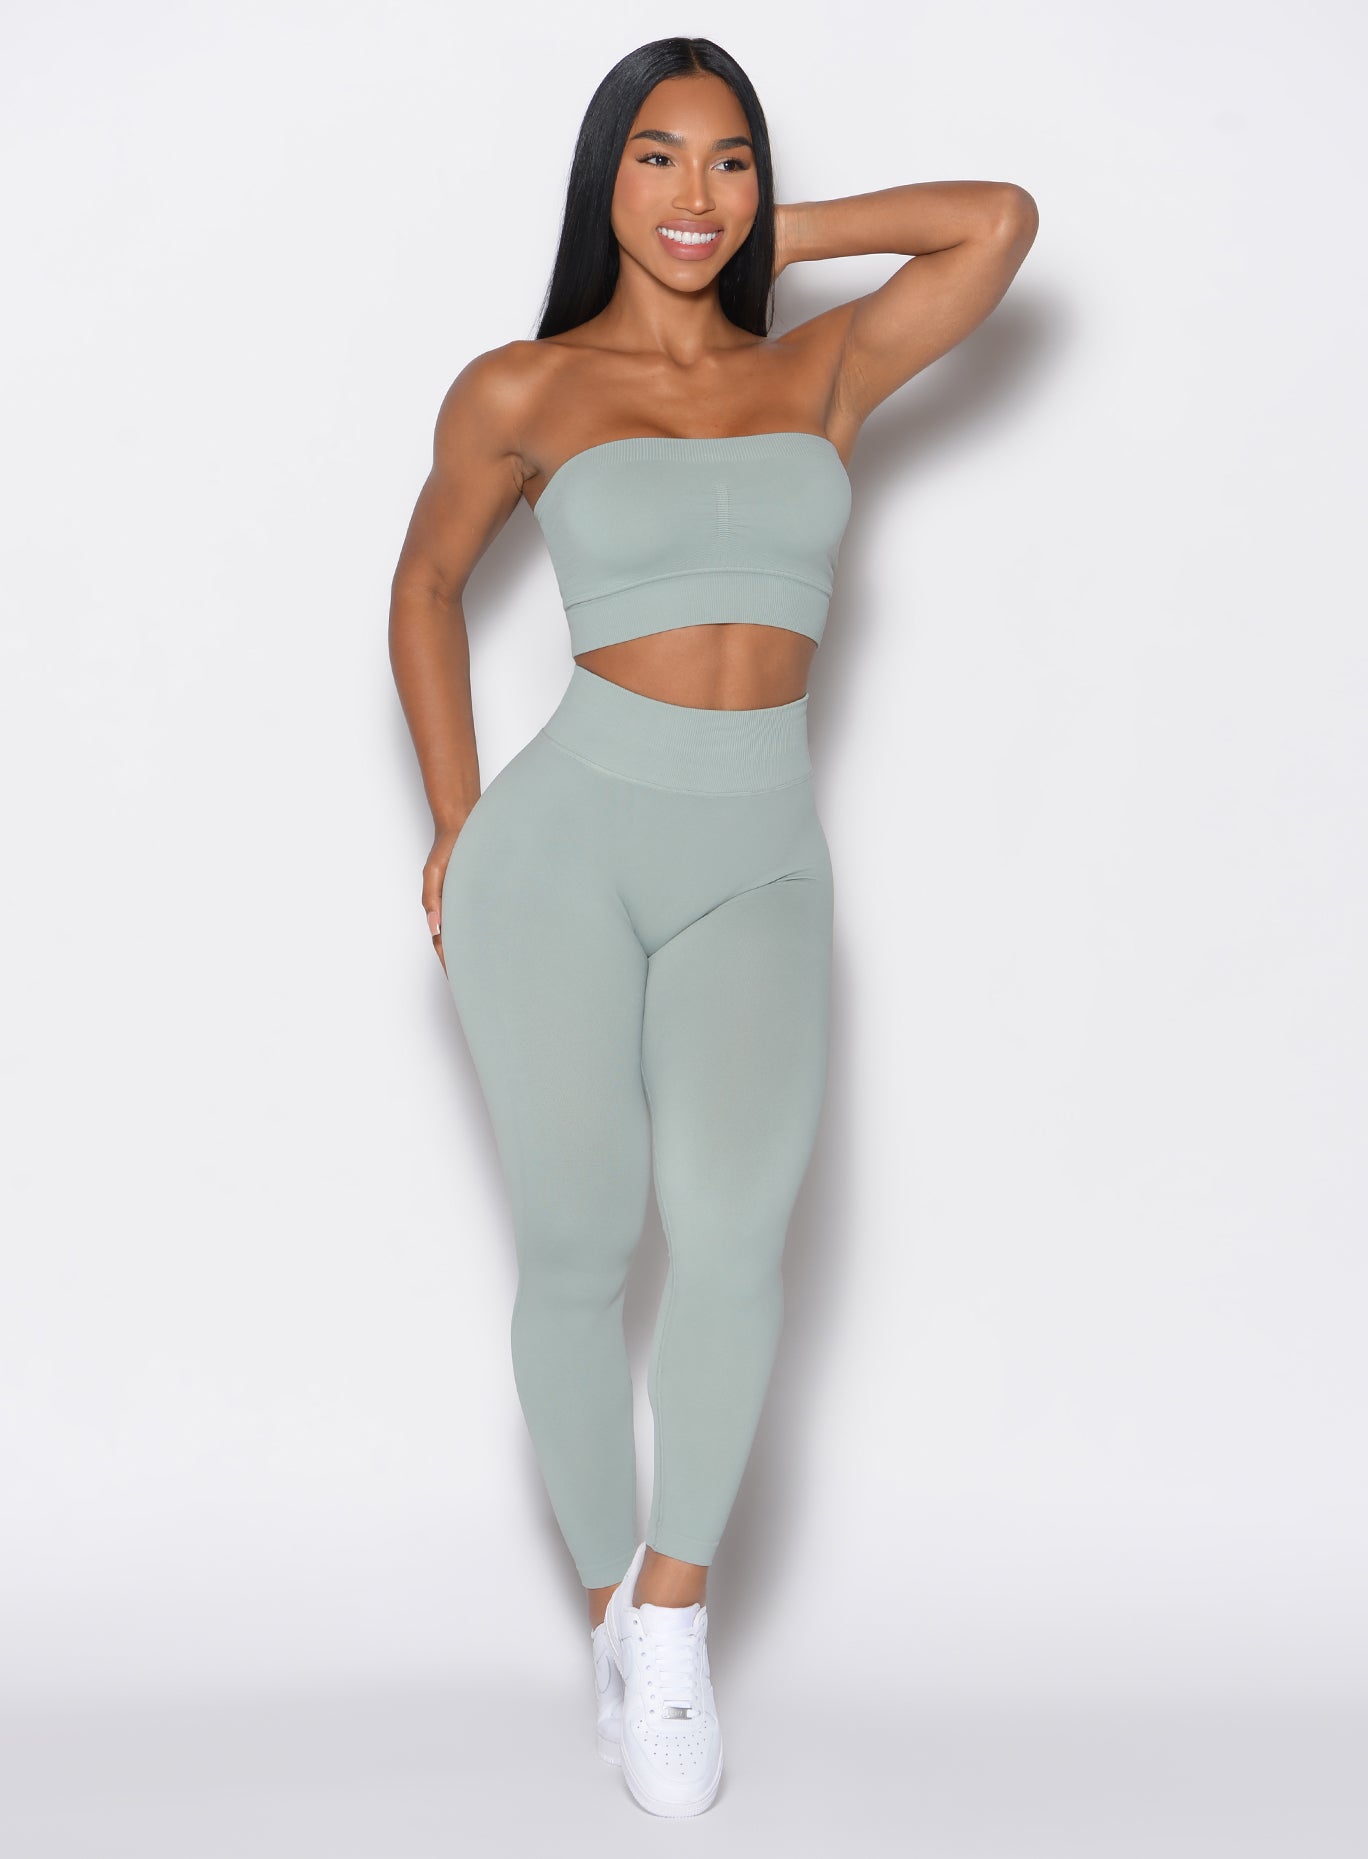 front profile view of a model wearing our cheeky seamless leggings in light jade color along with the matching top